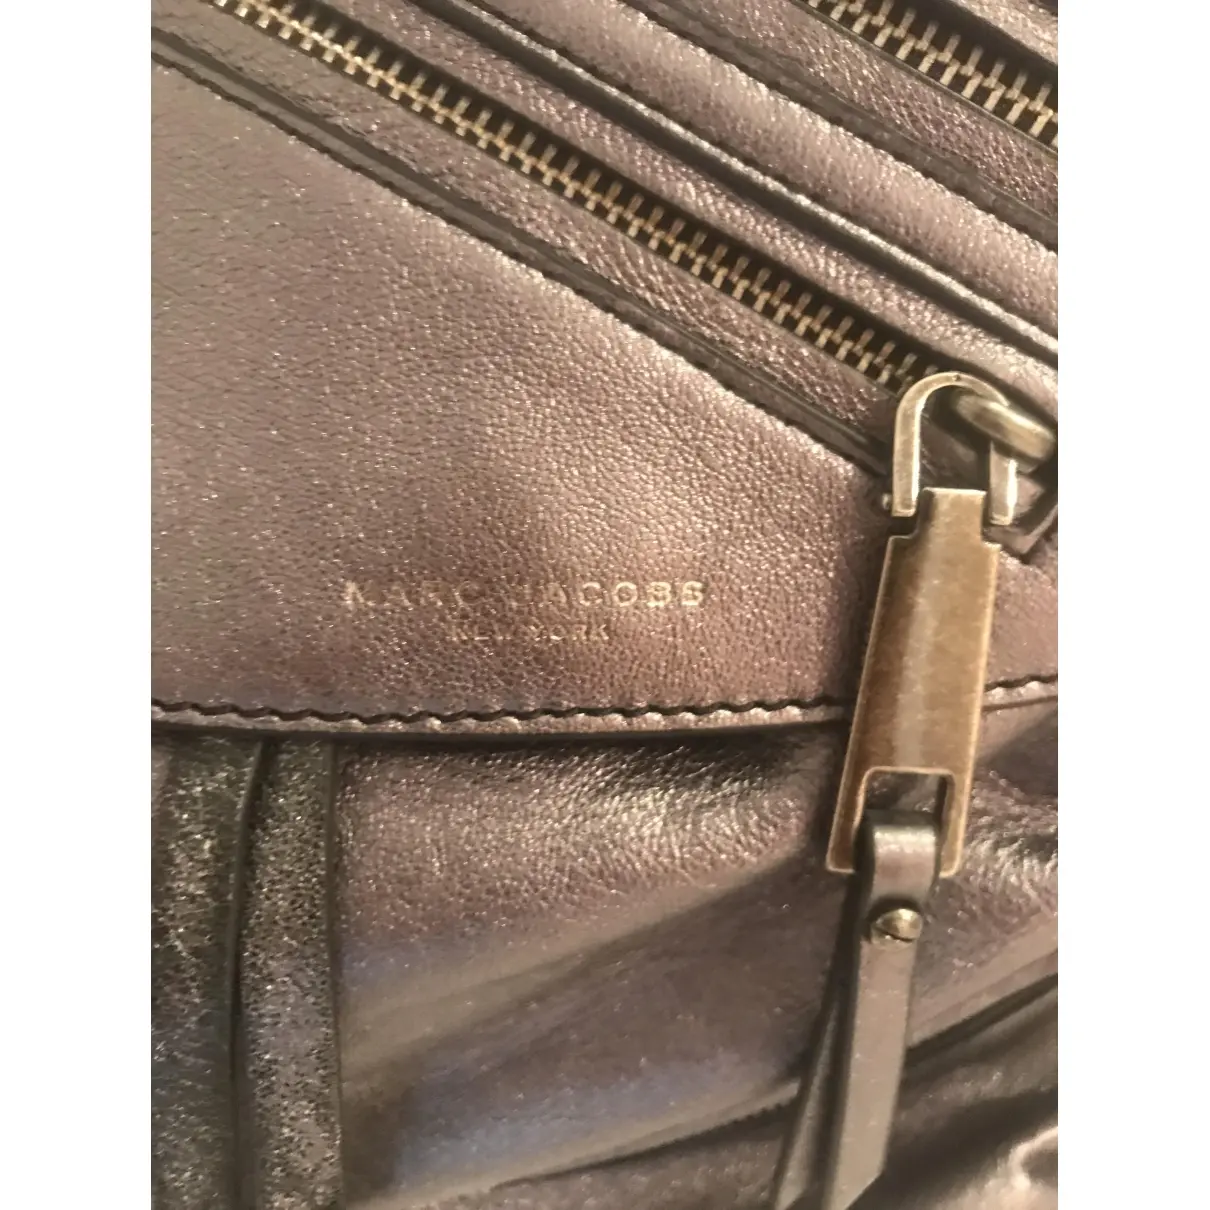 Leather backpack Marc Jacobs